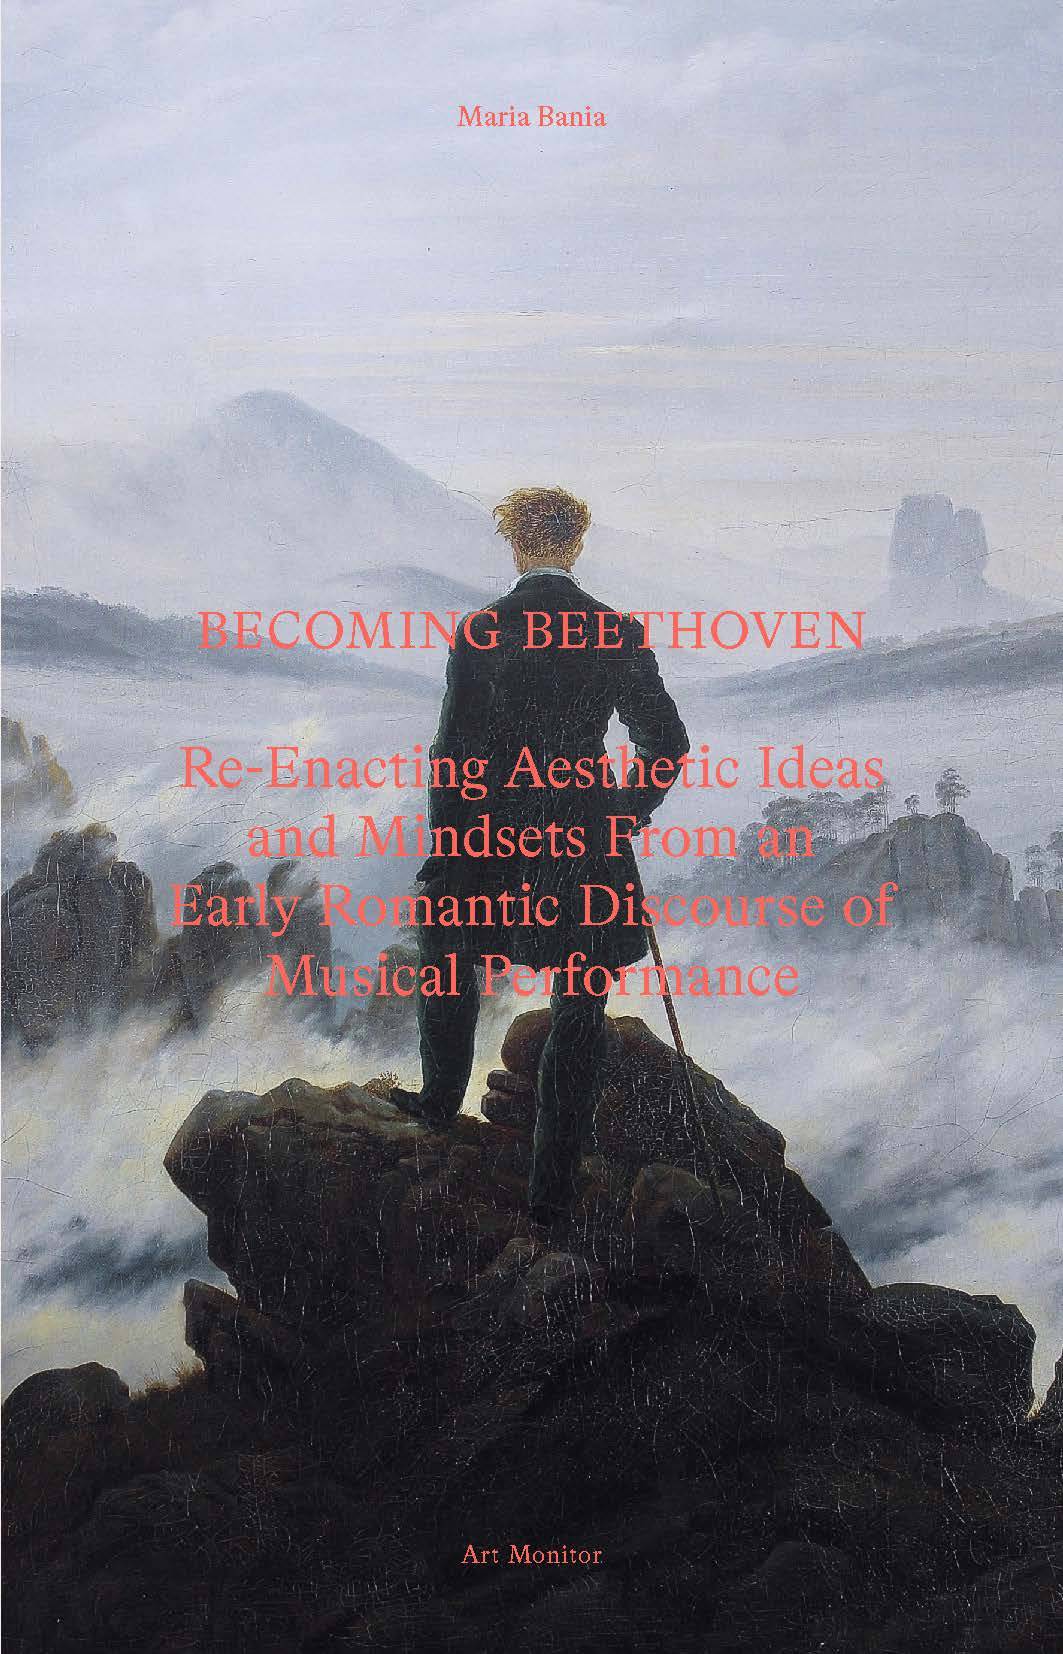 Becoming Beethoven : re-enacting aesthetic ideas and mindsets from an early romantic discourse of musical performance